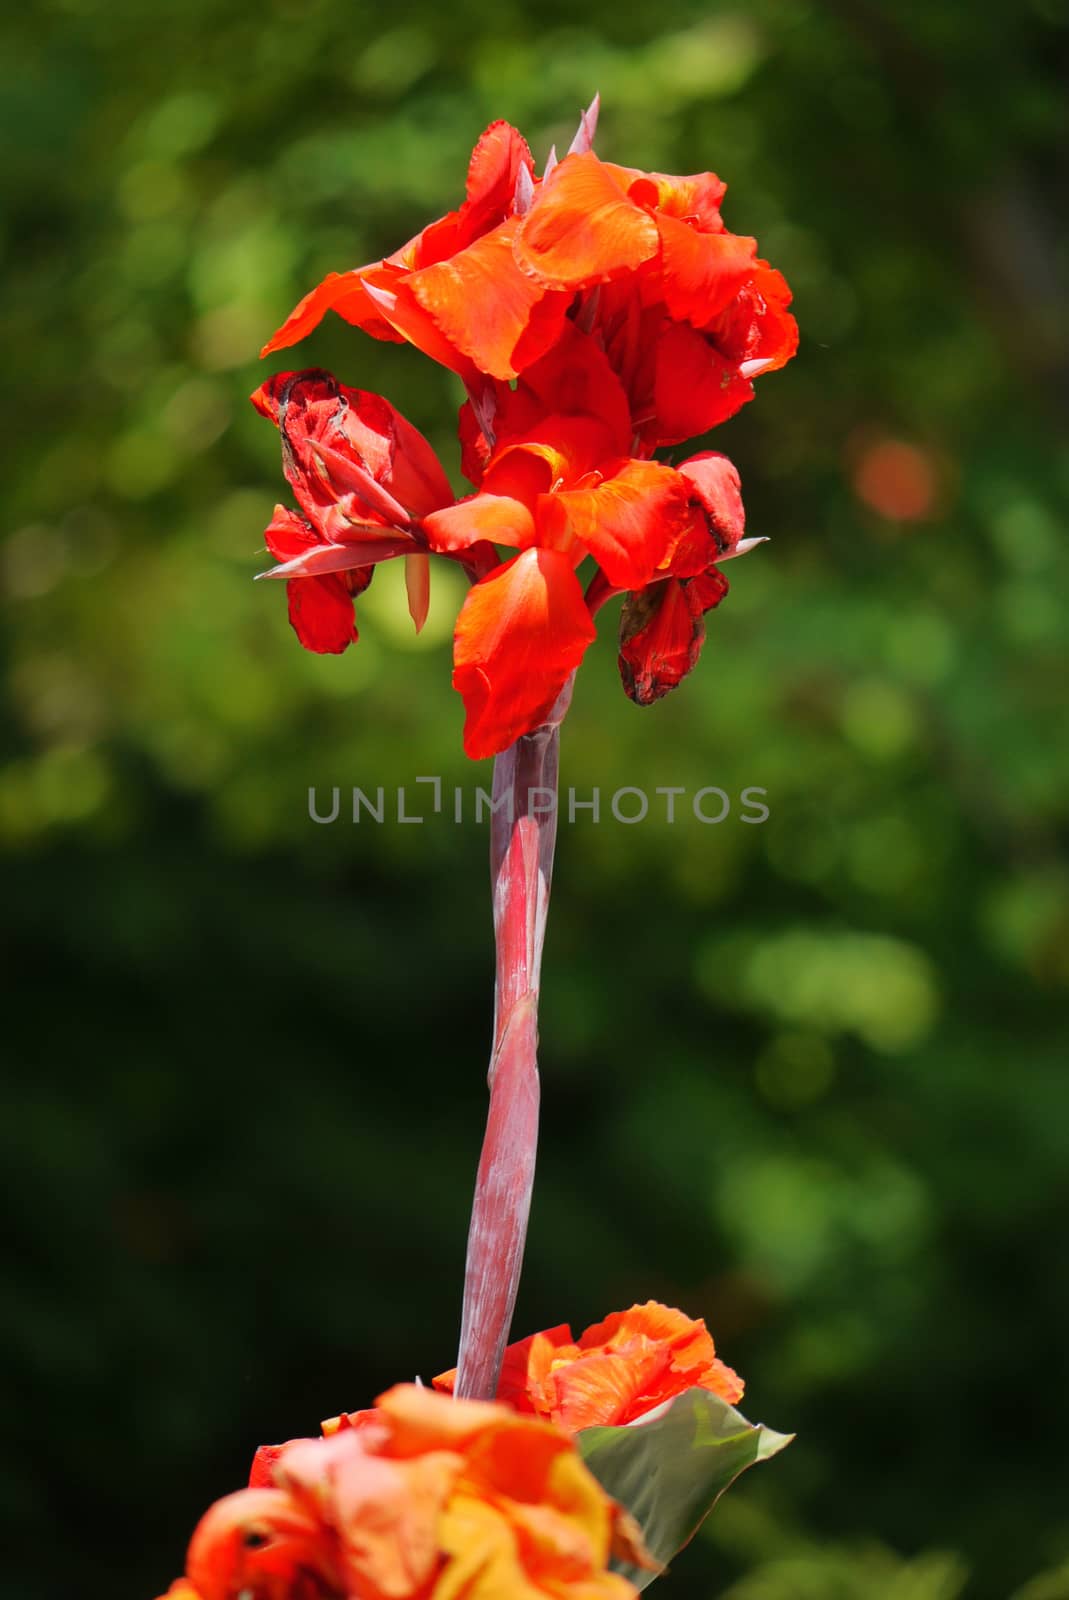 beautiful flower of a bright orange lily on a high stalk by Adamchuk